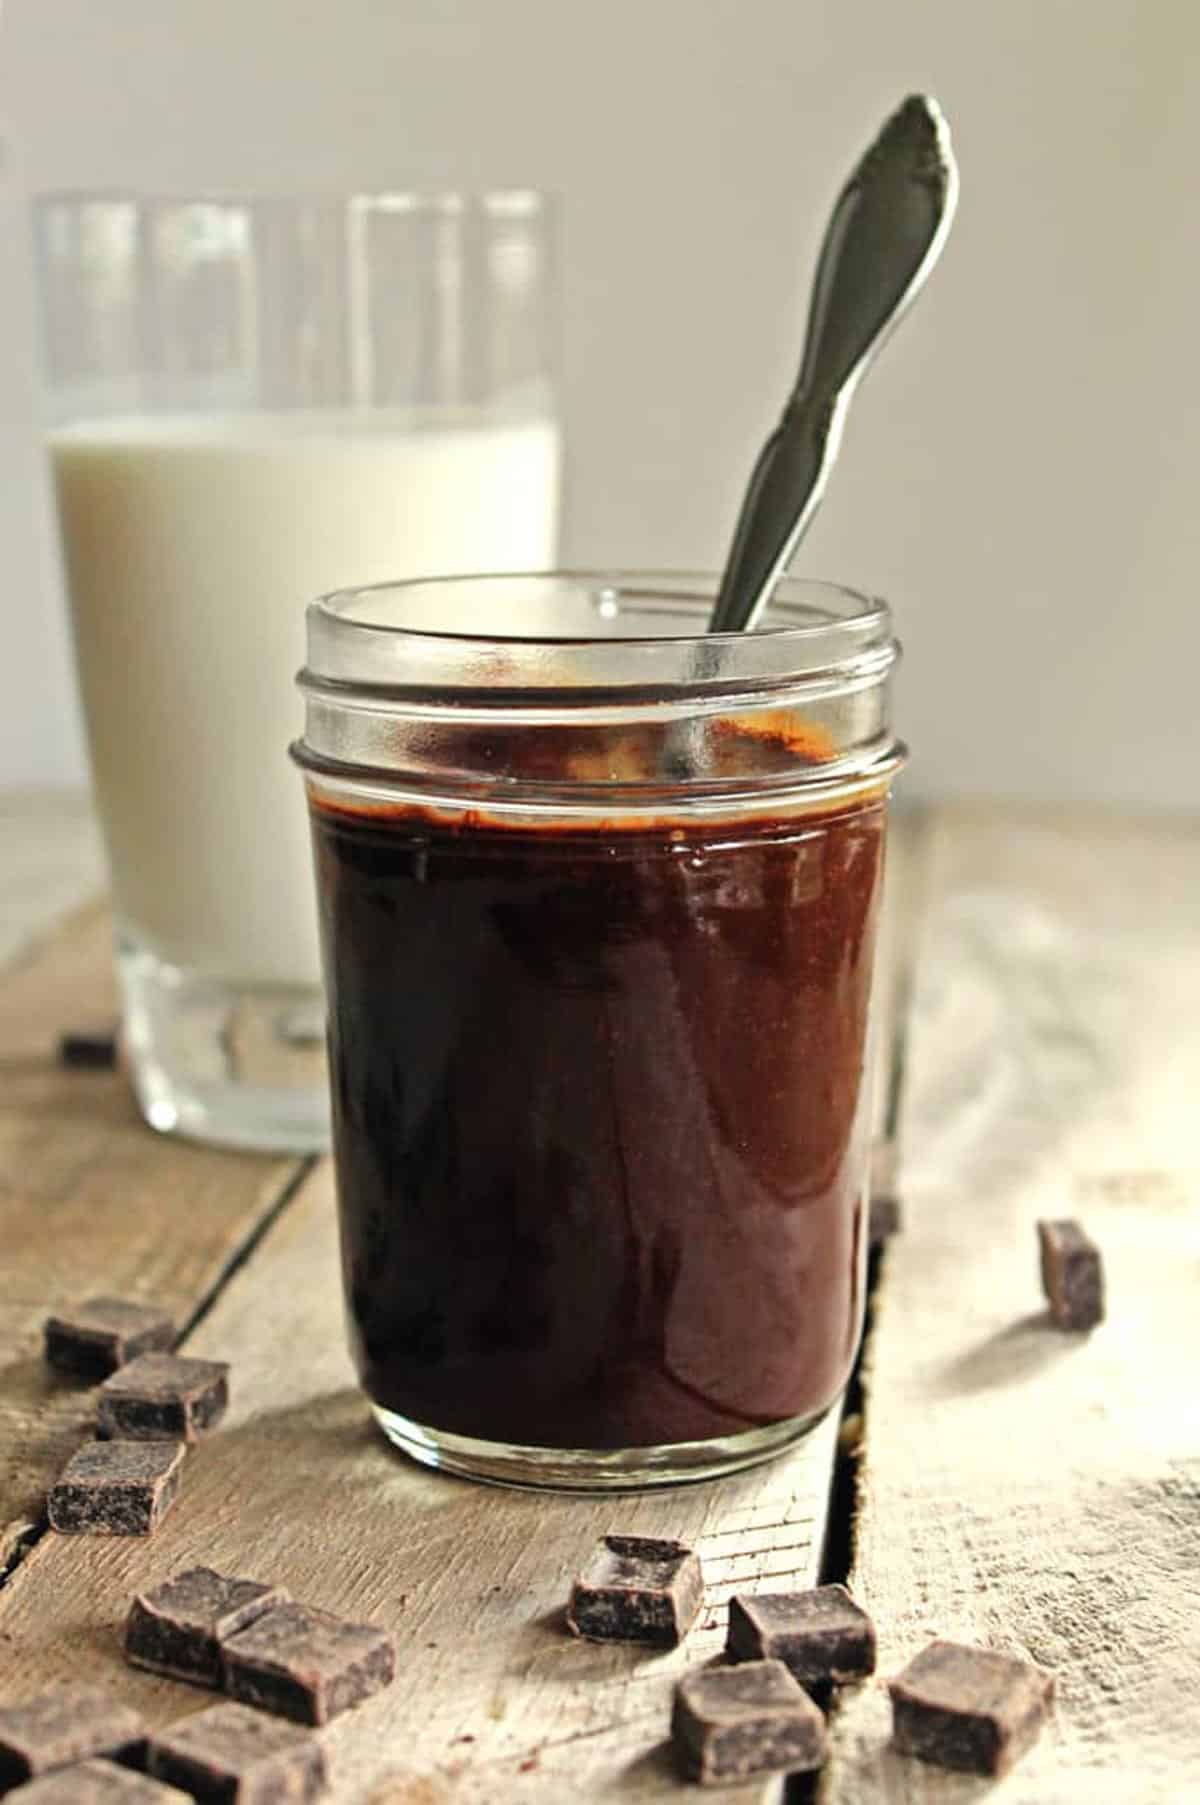 A photo of peanut butter chocolate sauce in a glass jar with a spoon.